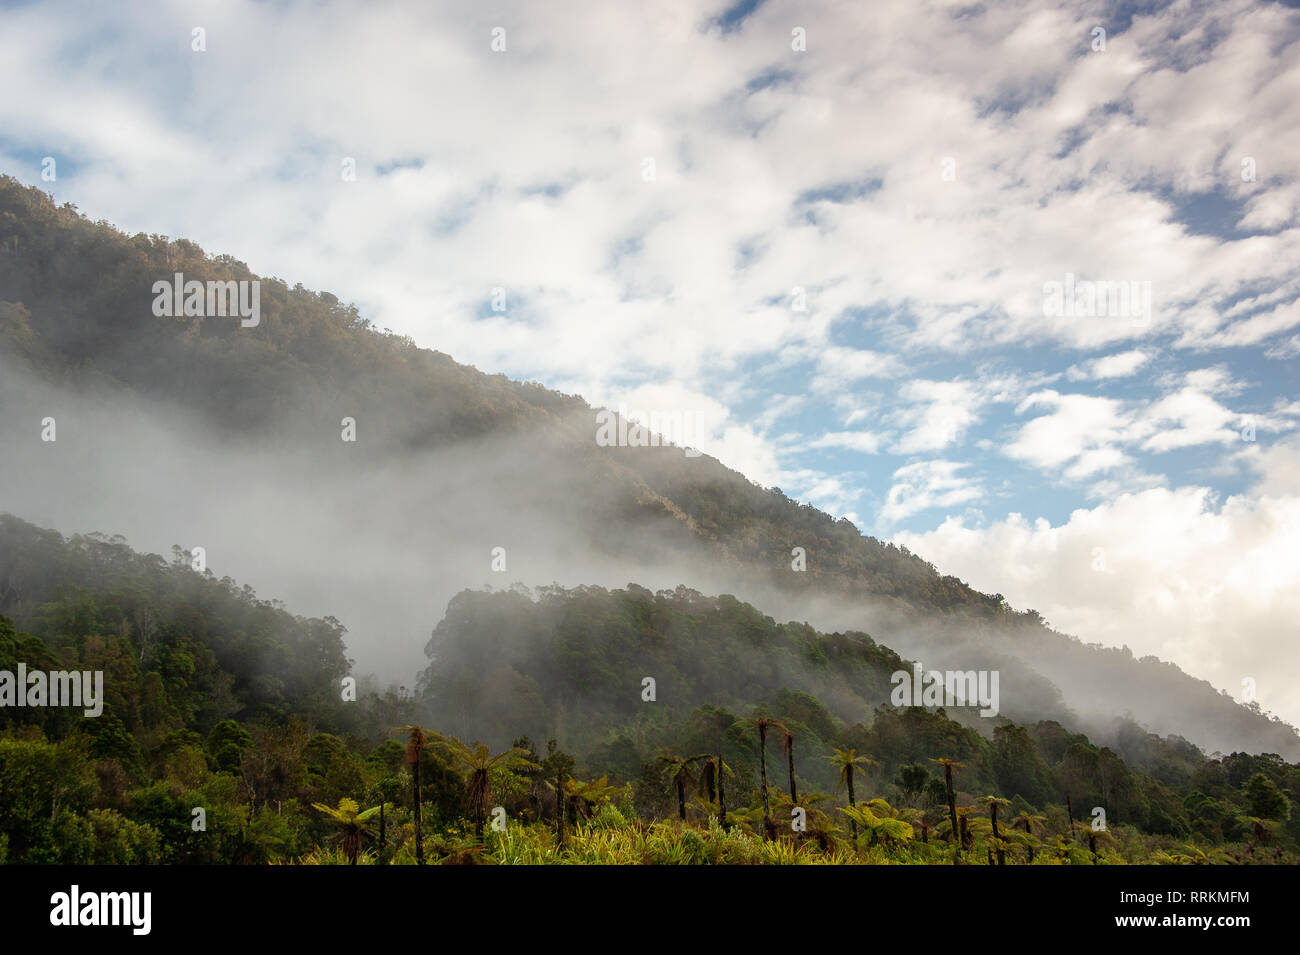 Tree ferns illuminated by sunlight against mist shrouded mountainside, and soft blue cloud sky background in Franz Josef National Park, New Zealand Stock Photo